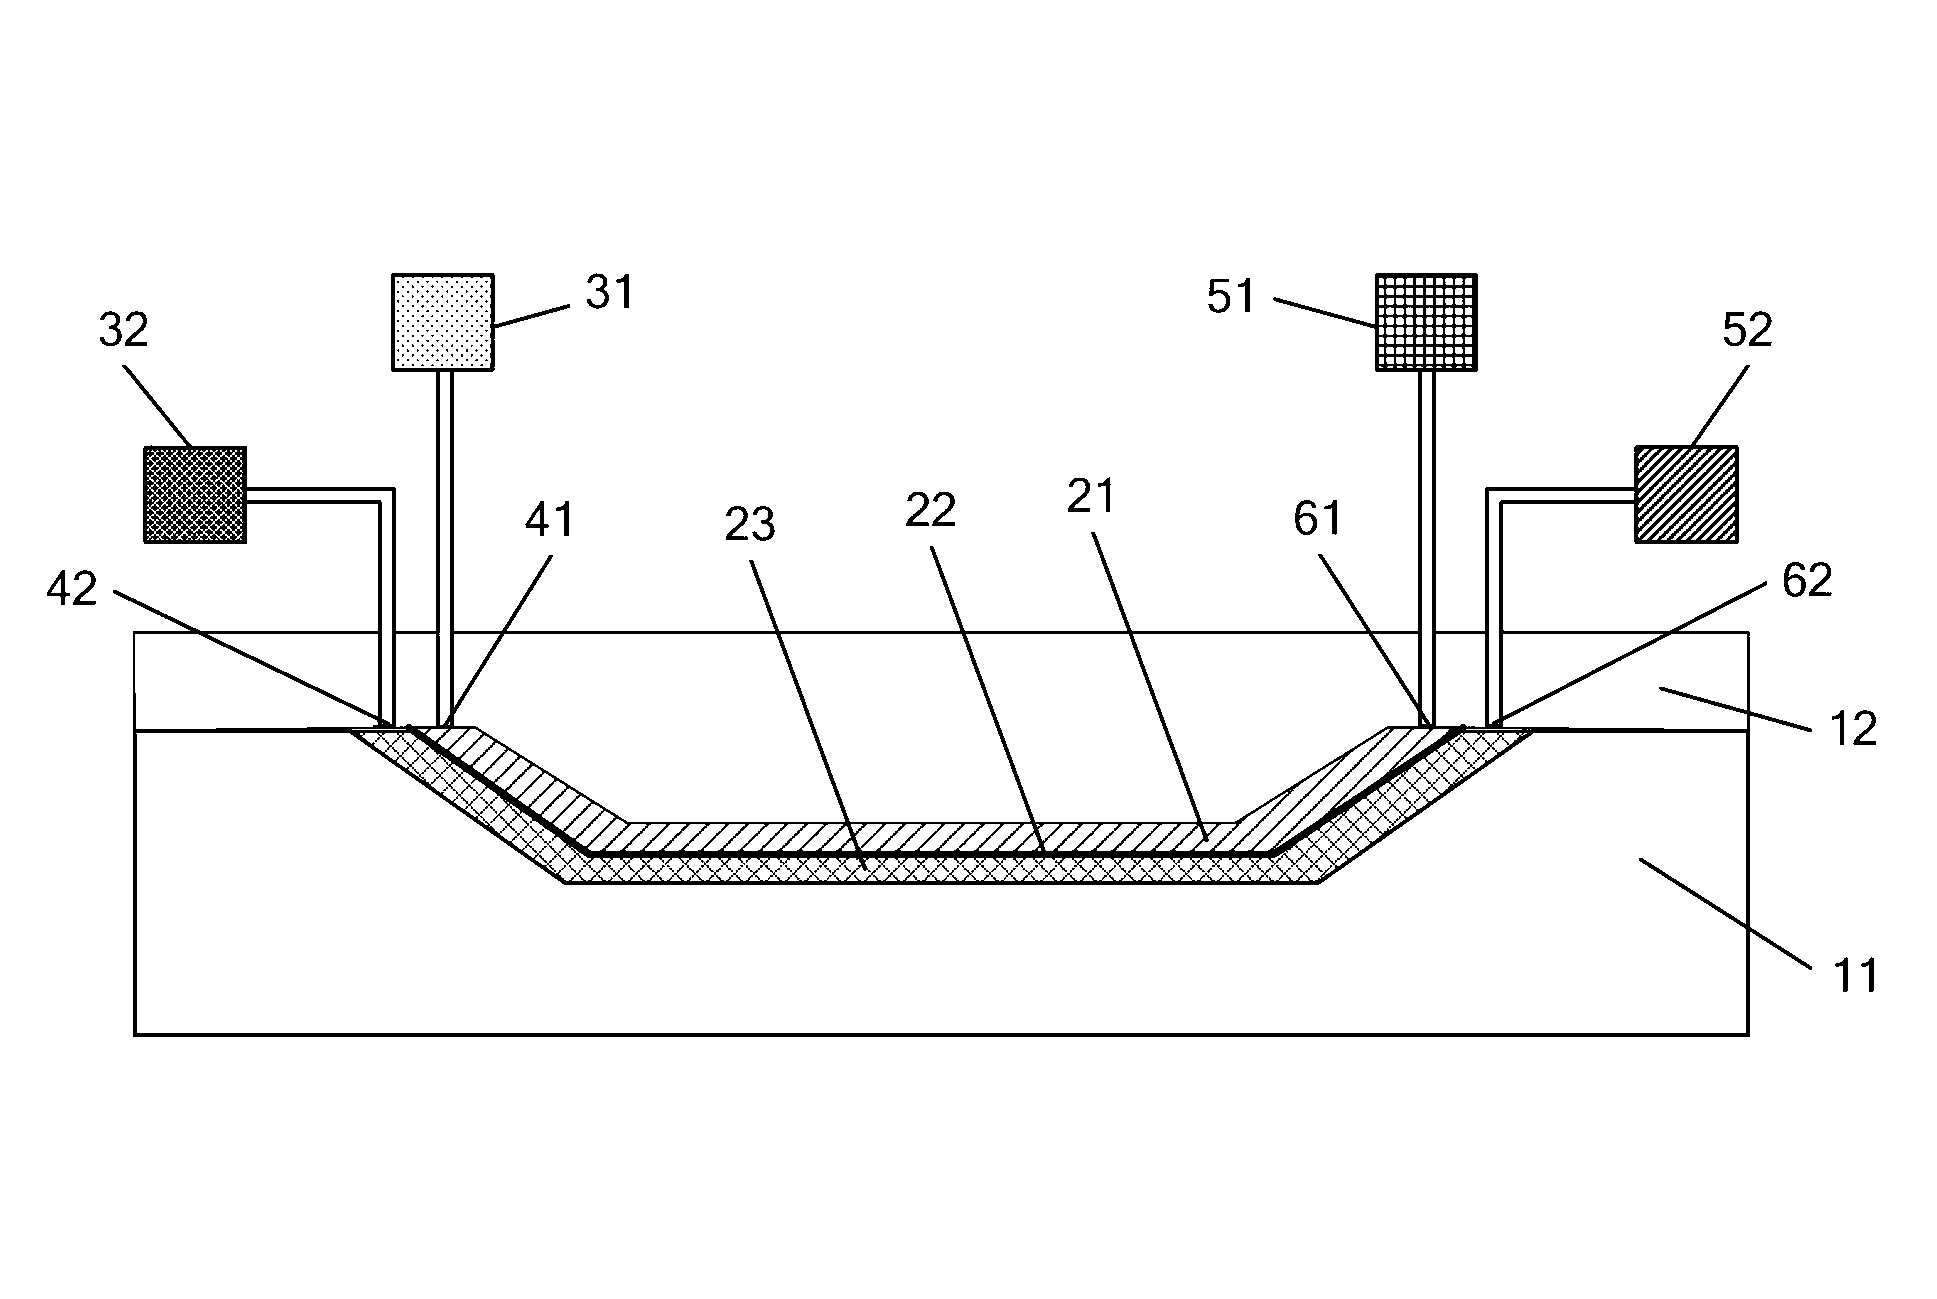 Spacecraft shell material as well as RTM (Resin Transfer Molding) molding technology and injection molding system thereof